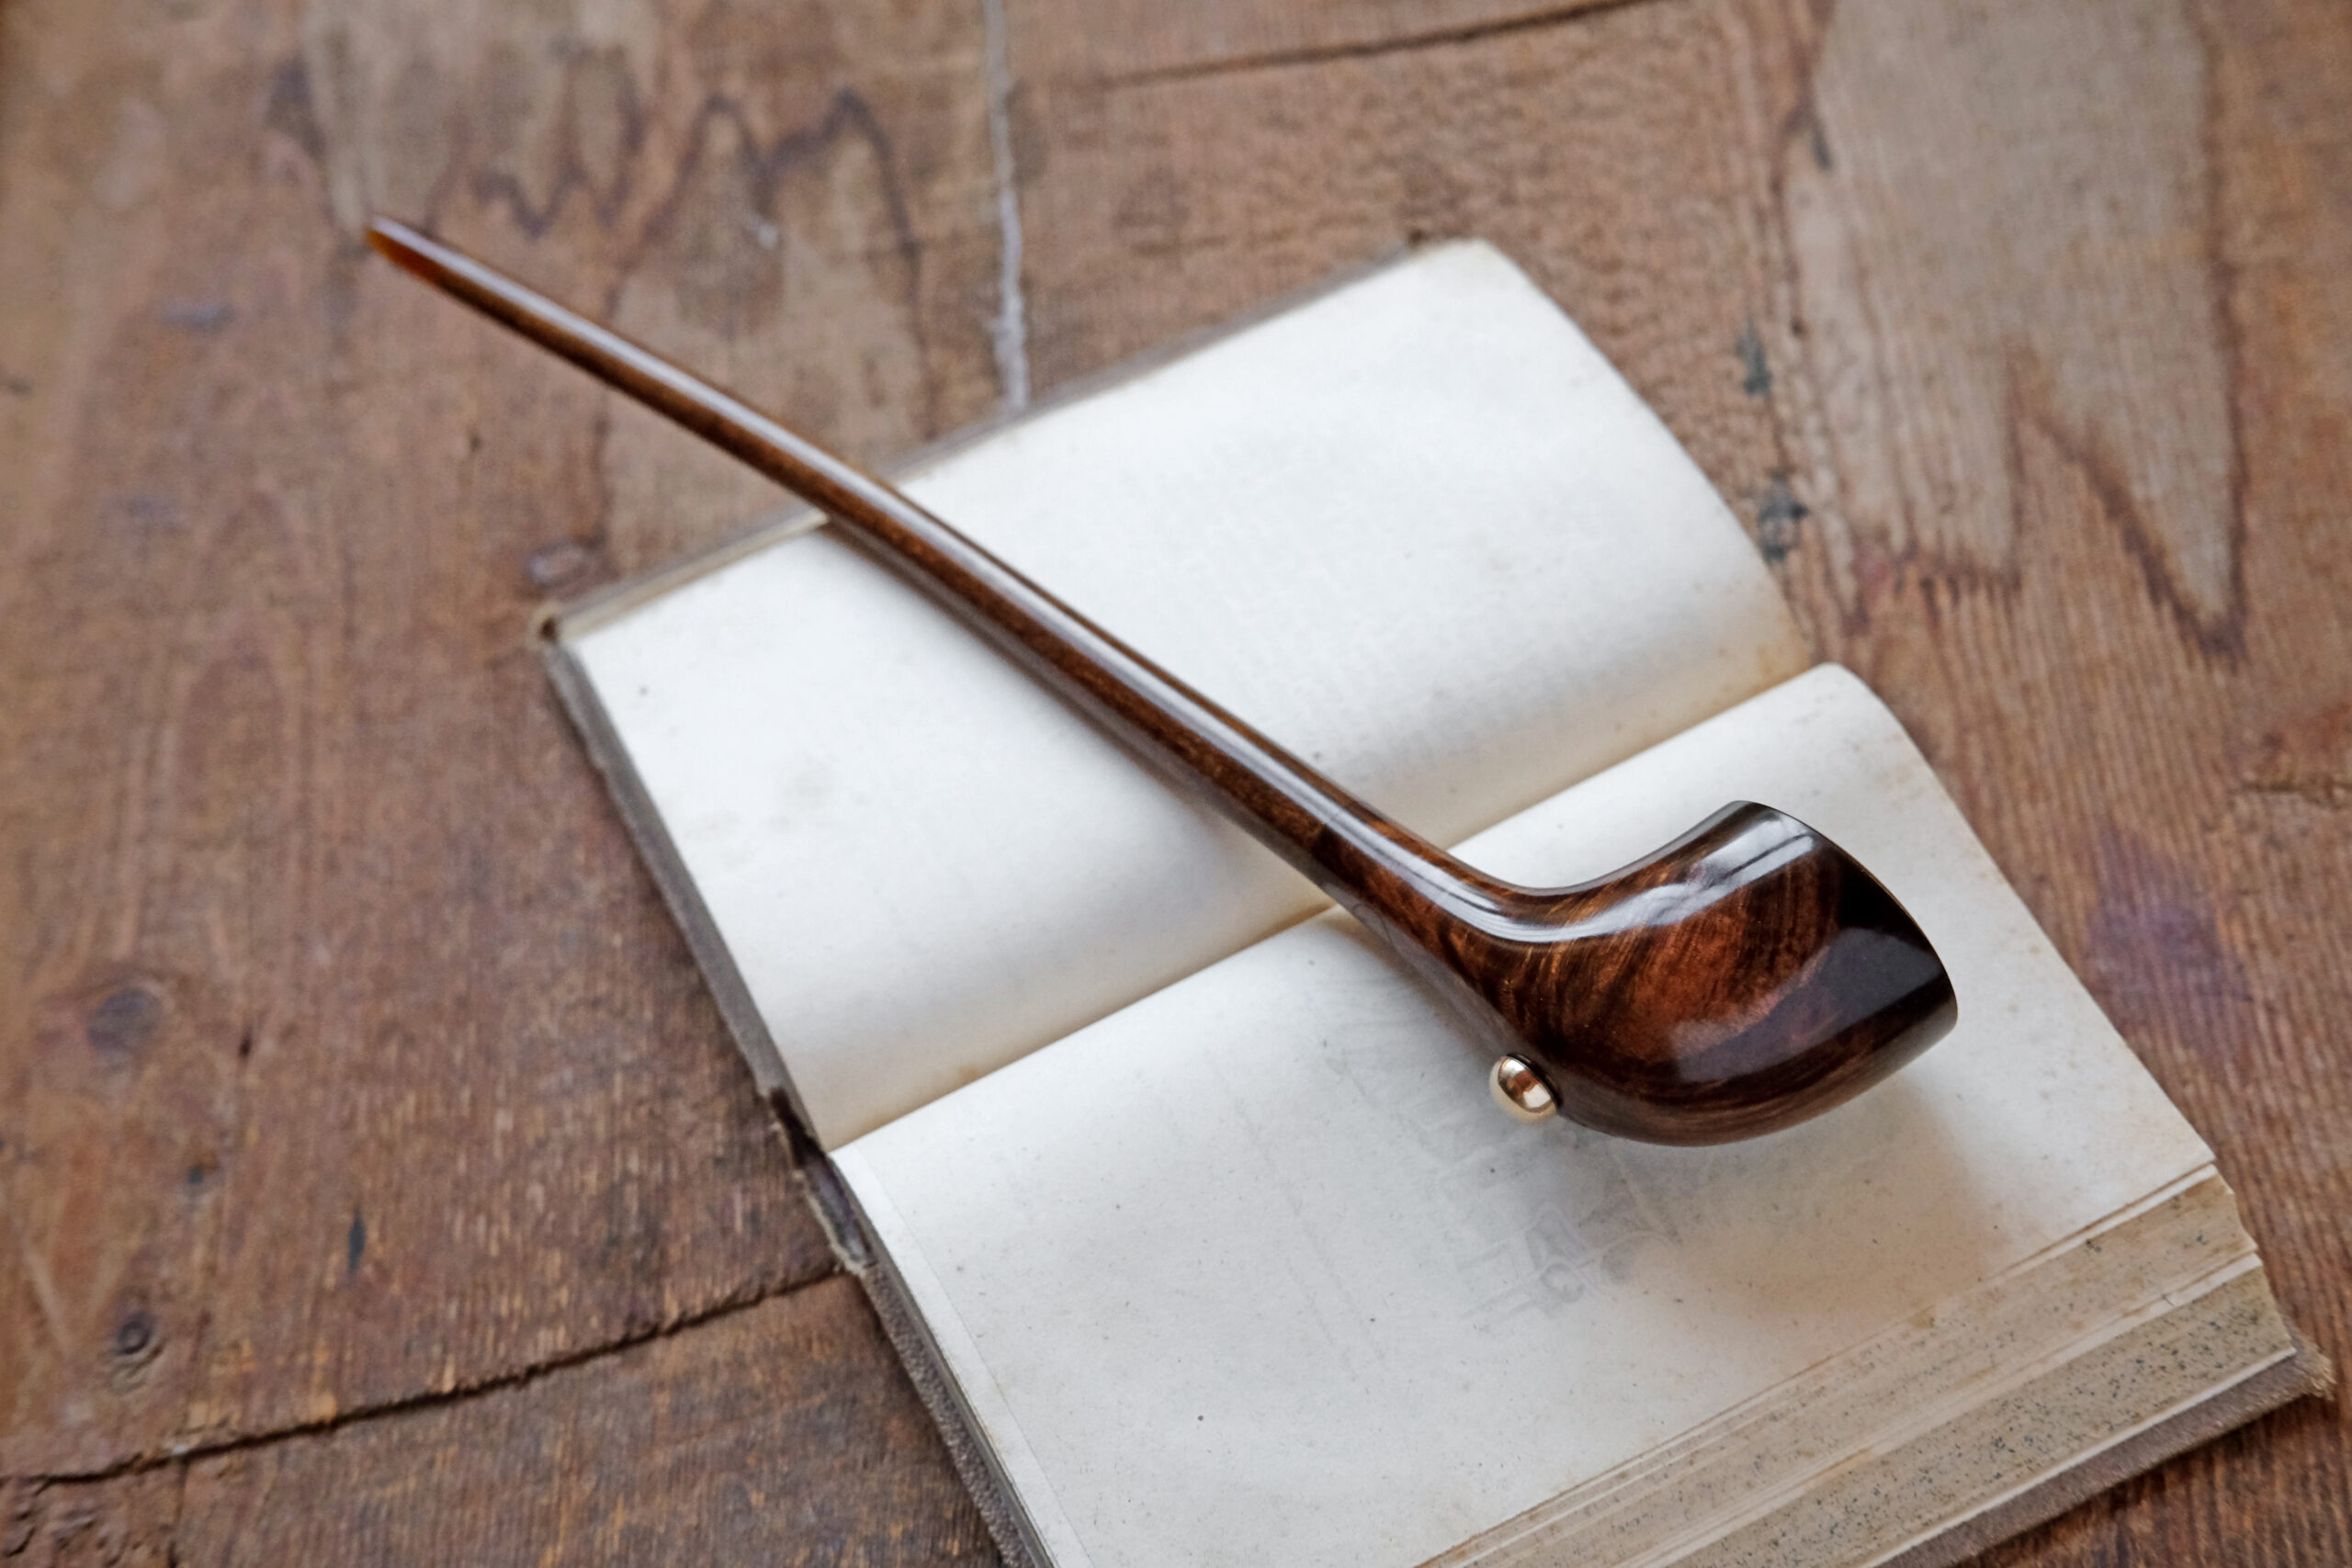 Aragorn's pipe, standard version churchwarden made of briar and maple, handmade by Arcangelo Ambrosi